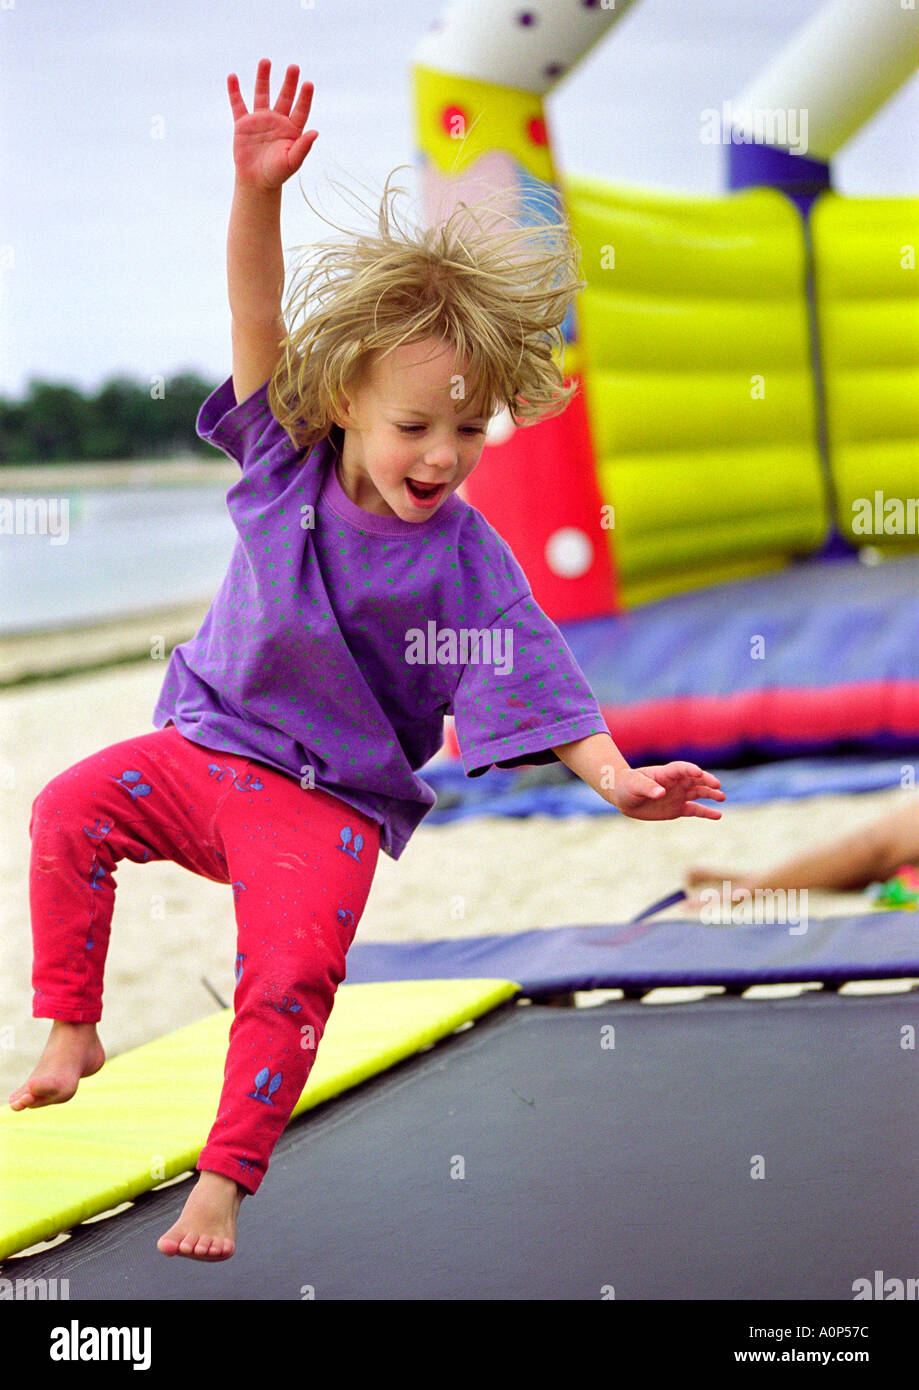 colourful and energetic image of young child up in the air, jumping on a trampoline Stock Photo